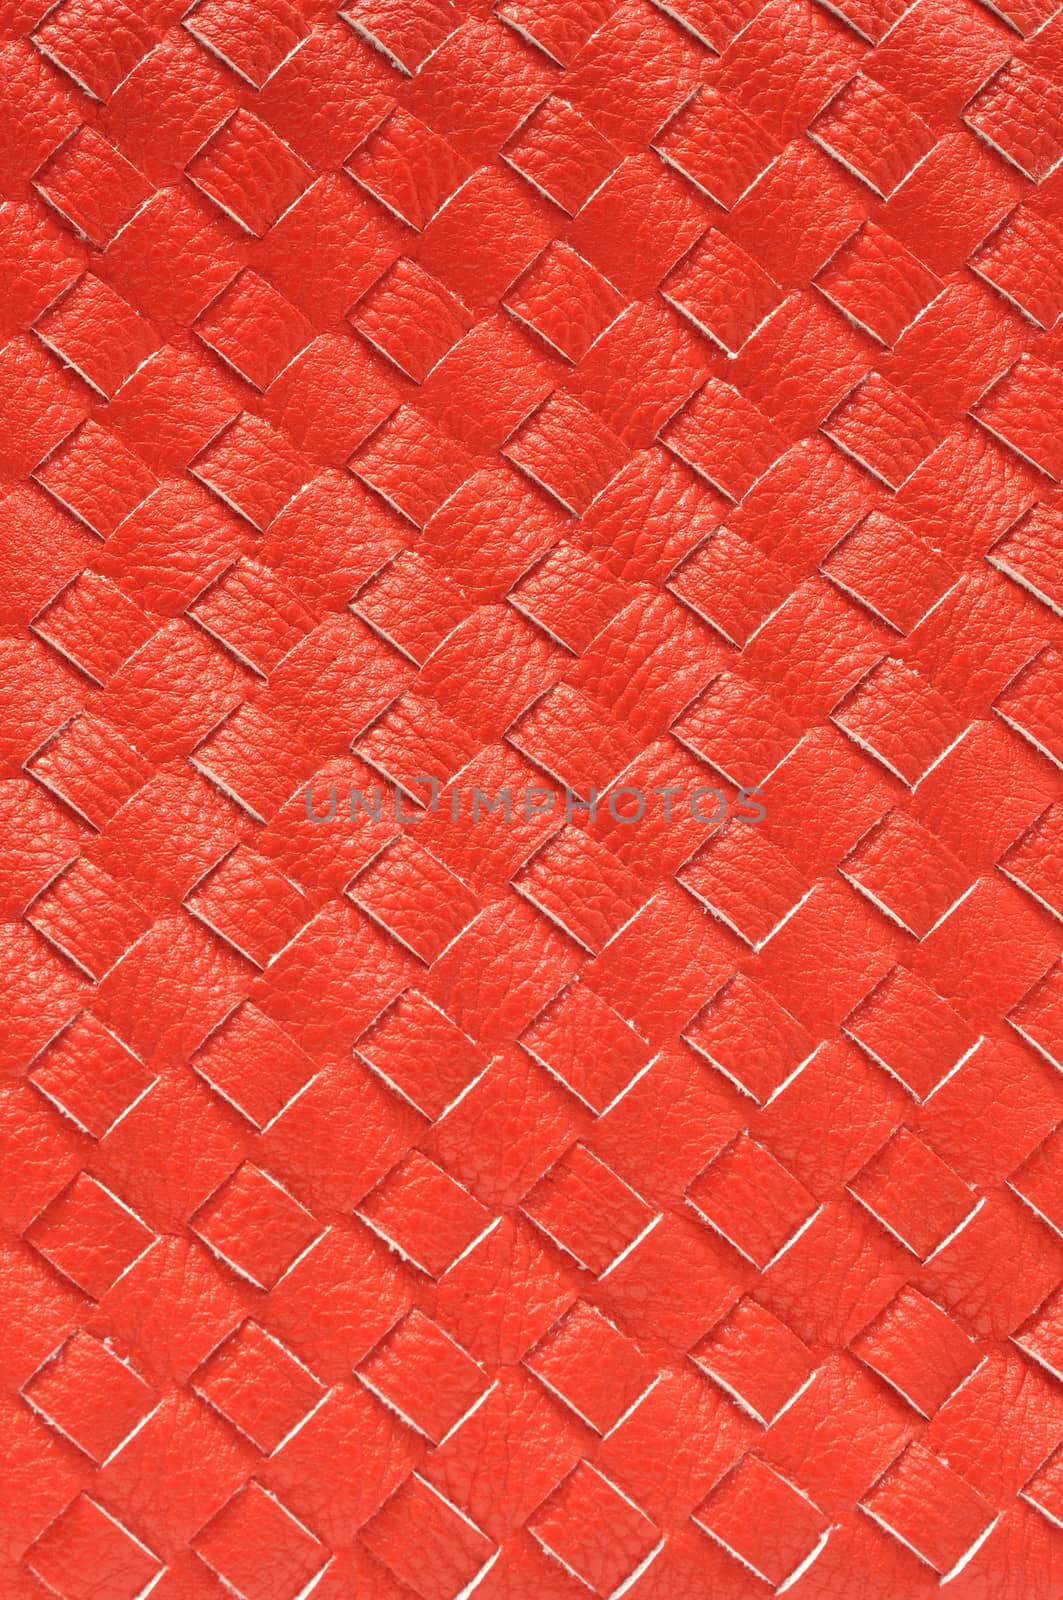 Close up of Red leather weaving for use as Background or Texture by thampapon